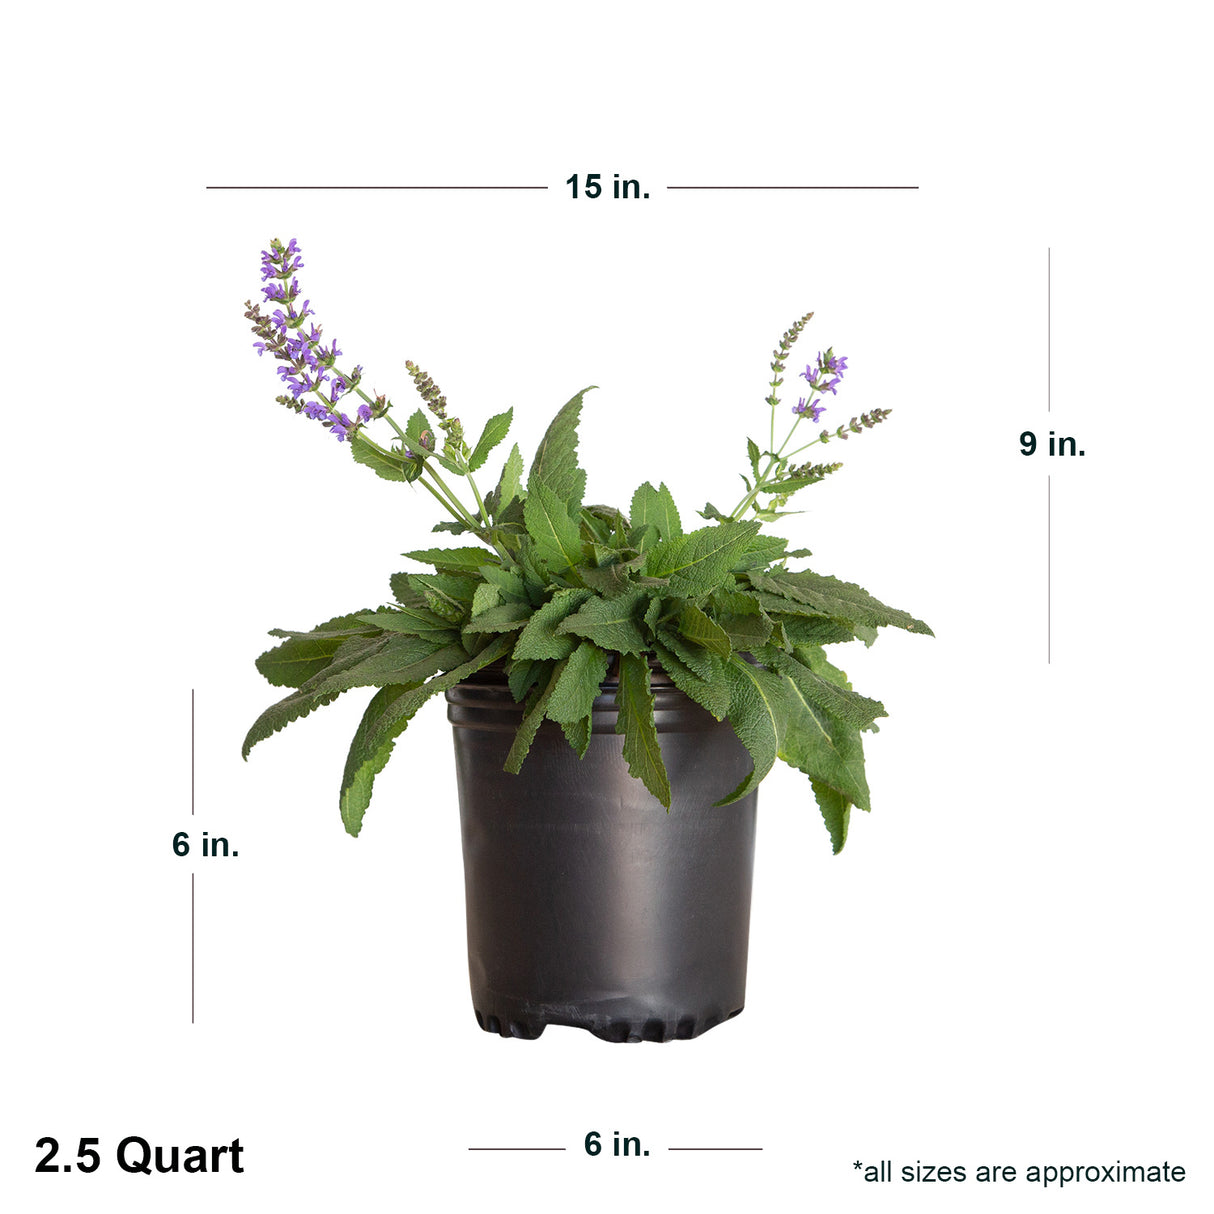 2.5 Quart May night Salvia in black container showing dimensions.